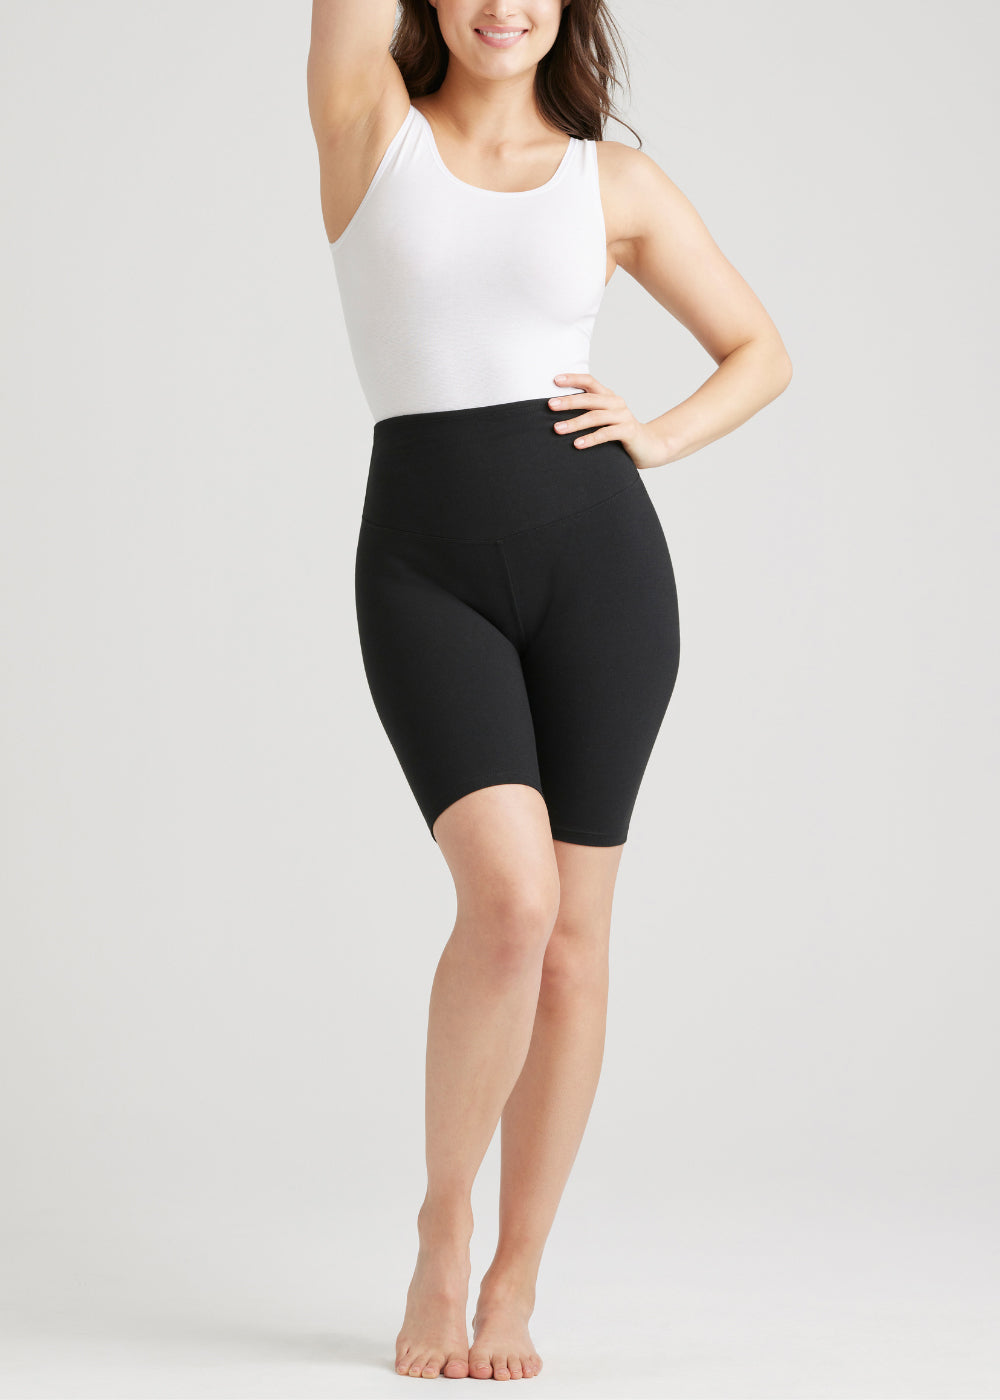 mel shaping biker short - cotton stretch in Black and  ruby shaping full back bodysuit - cotton seamless in White worn by a woman standing facing forward with one hand at waist and the other arm raised overhead Yummie